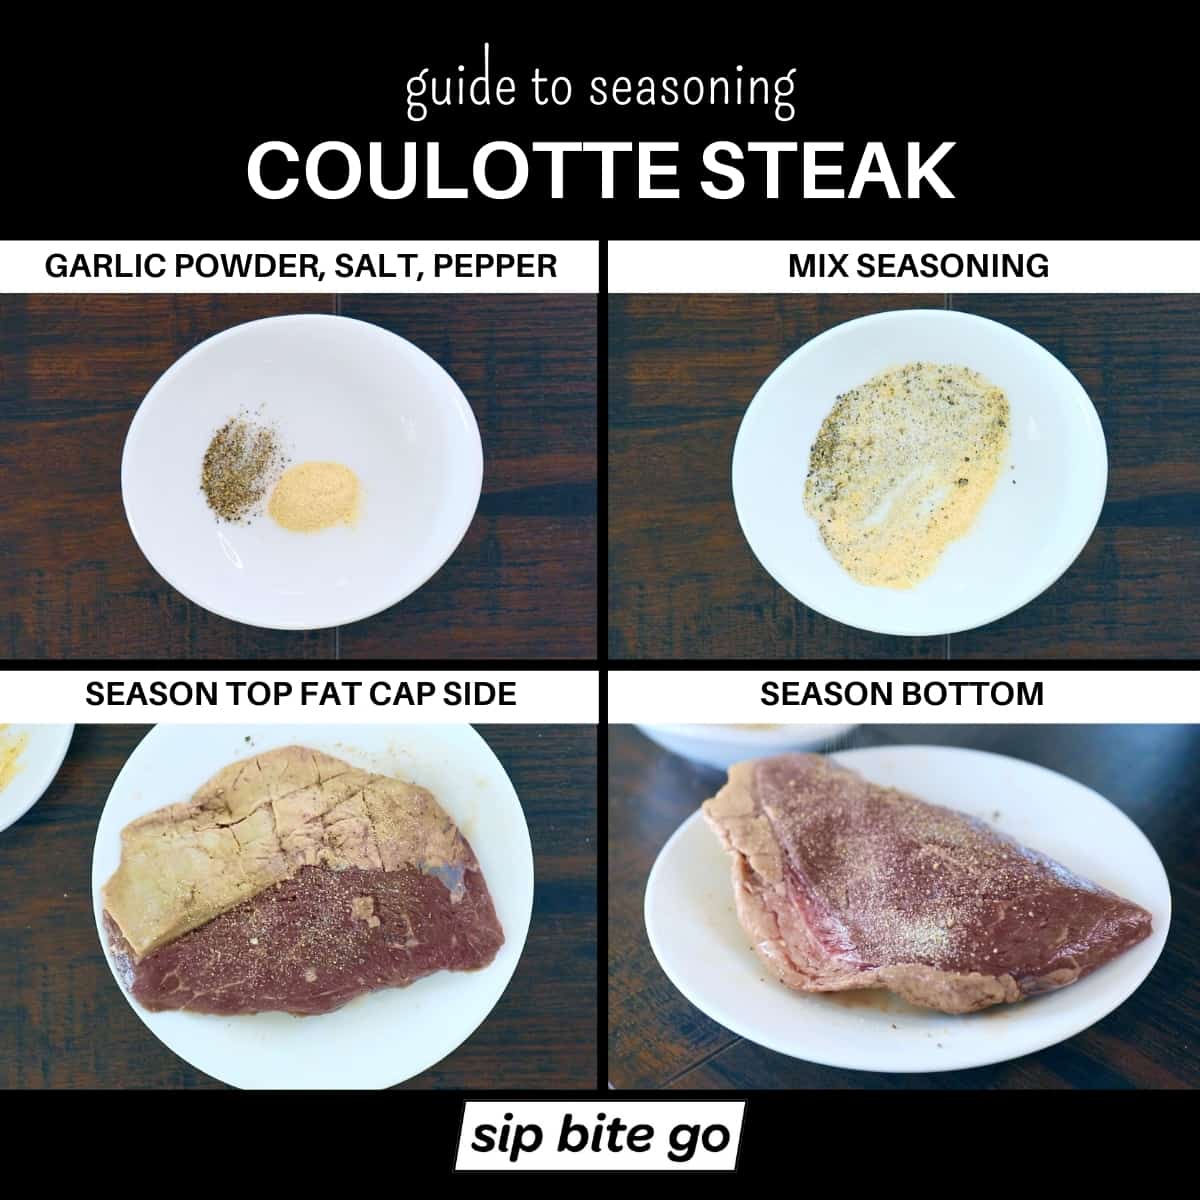 Coulotte steak seasoning infographic chart.